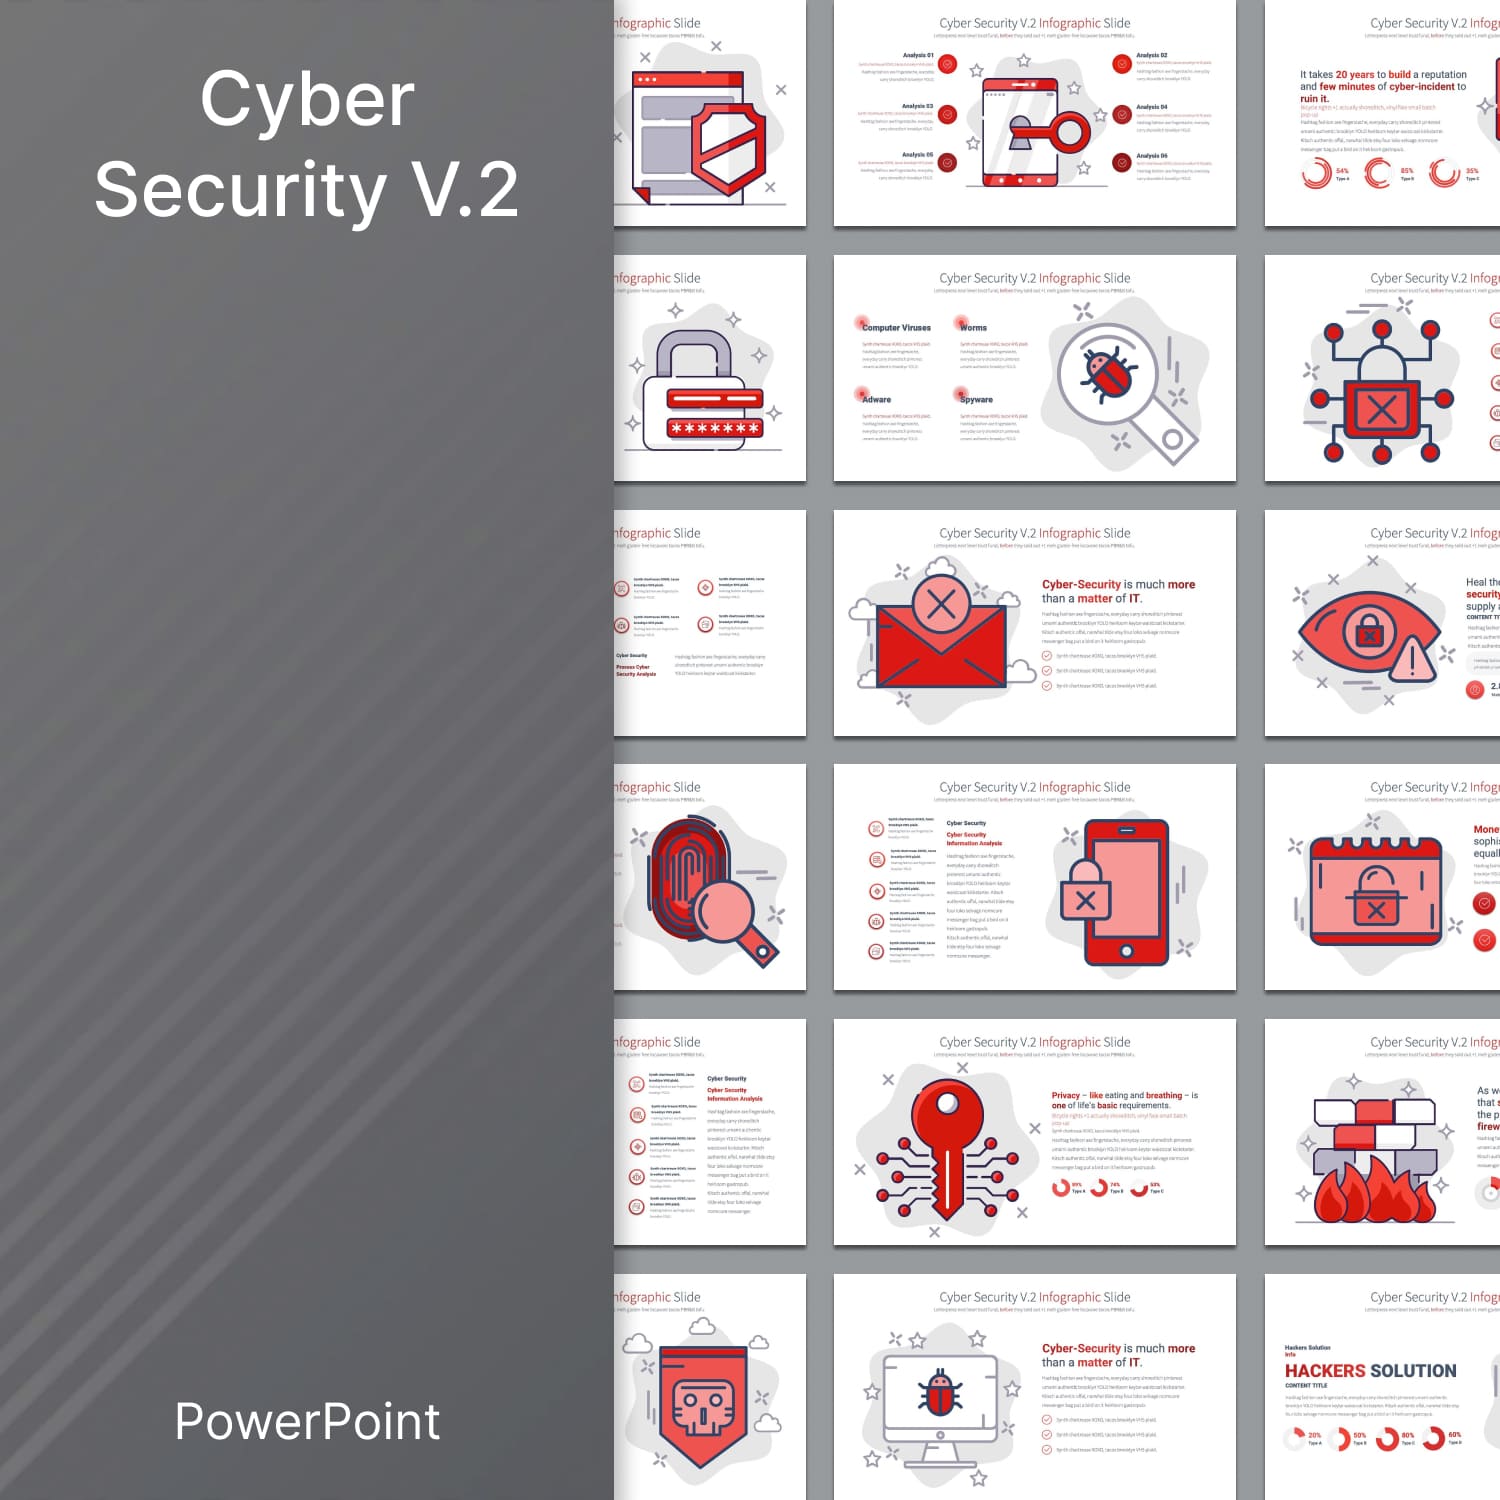 Cyber Security V.2 PowerPoint.